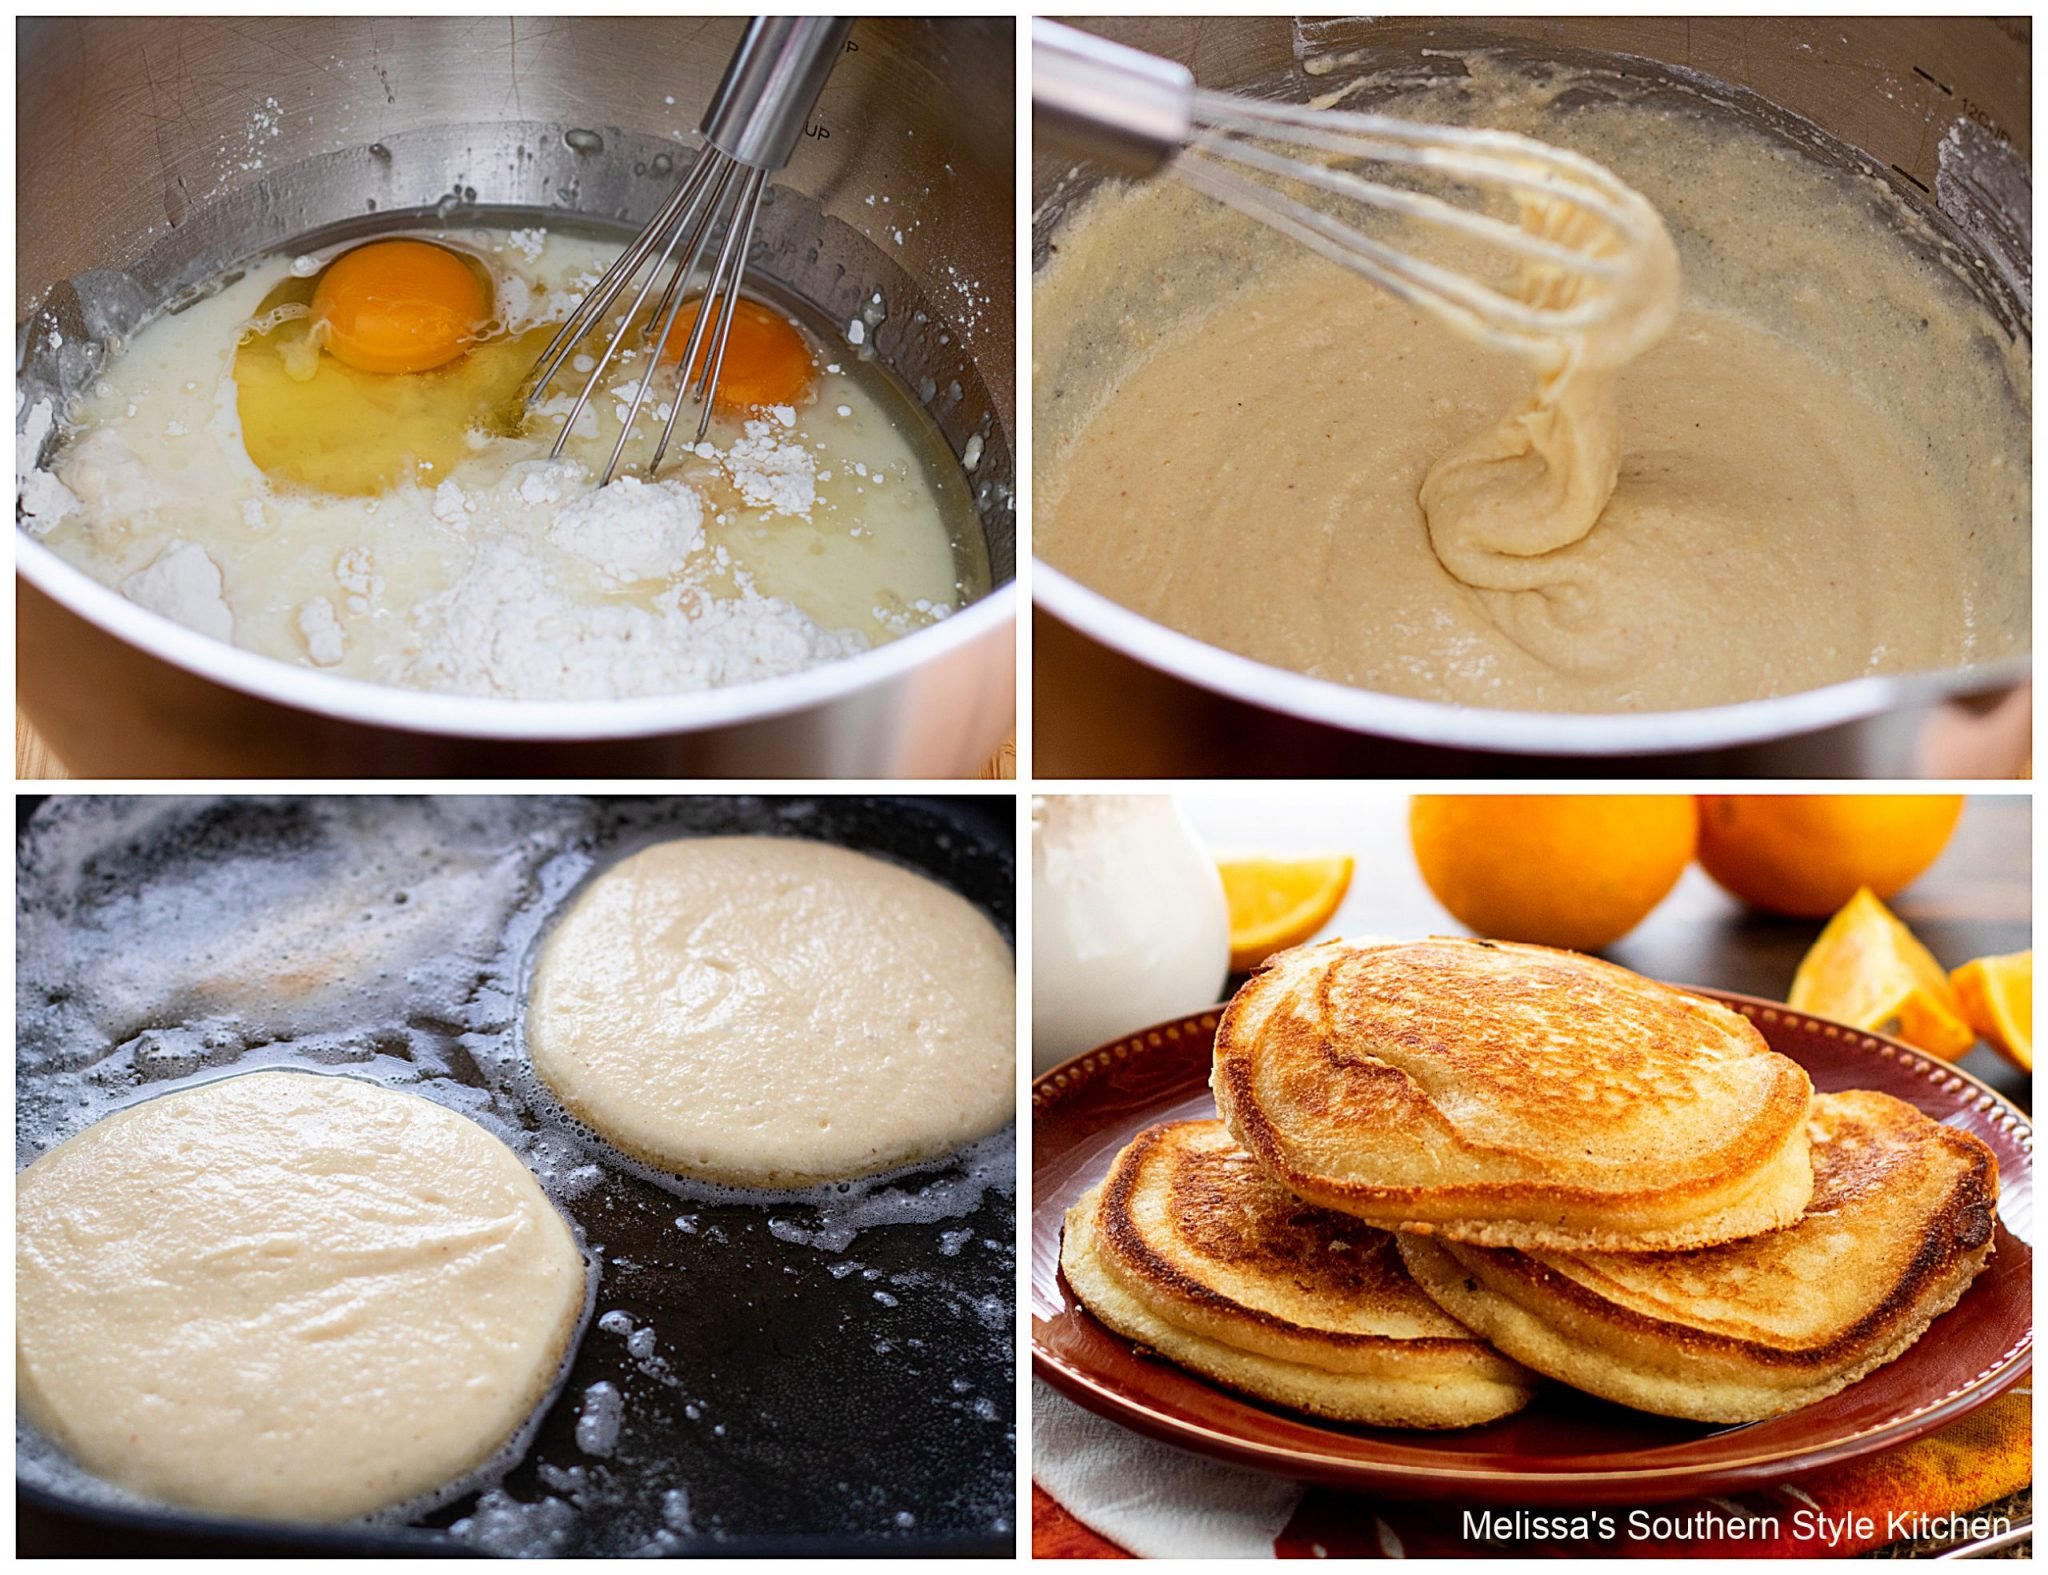 step-by-step preparation and ingredients for hoe cakes